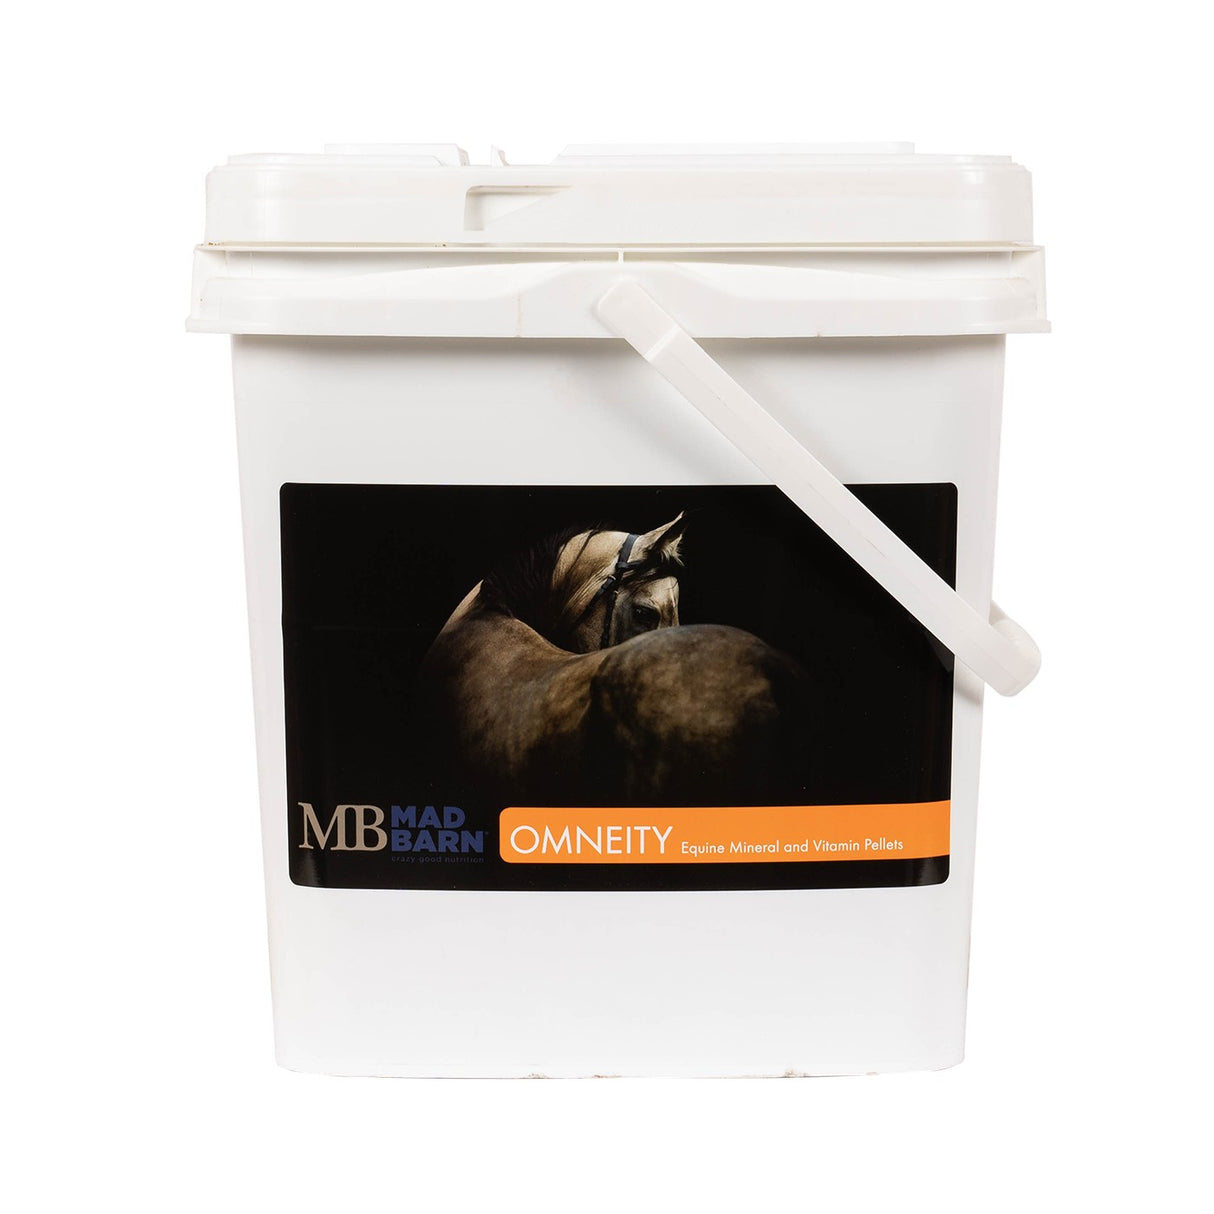 Mad Barn Omneity Equine Mineral Vitamin Pellets 5 Kg